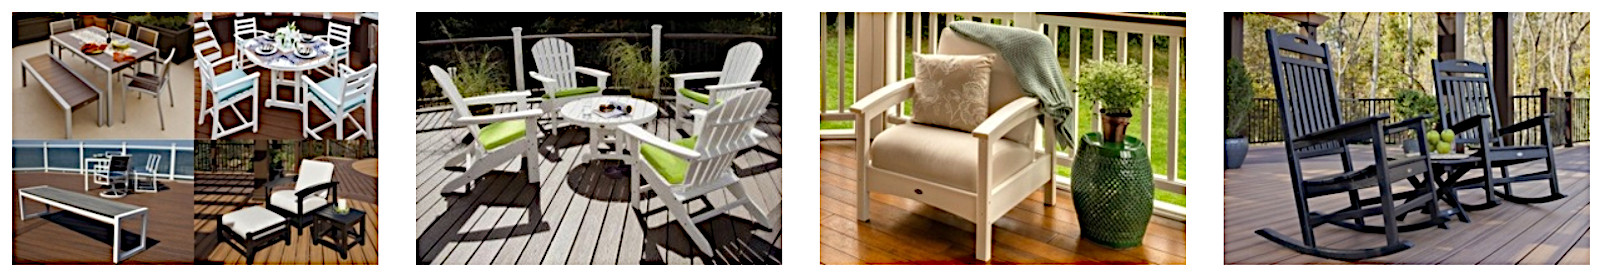 Clearance Price Trex outdoor furniture